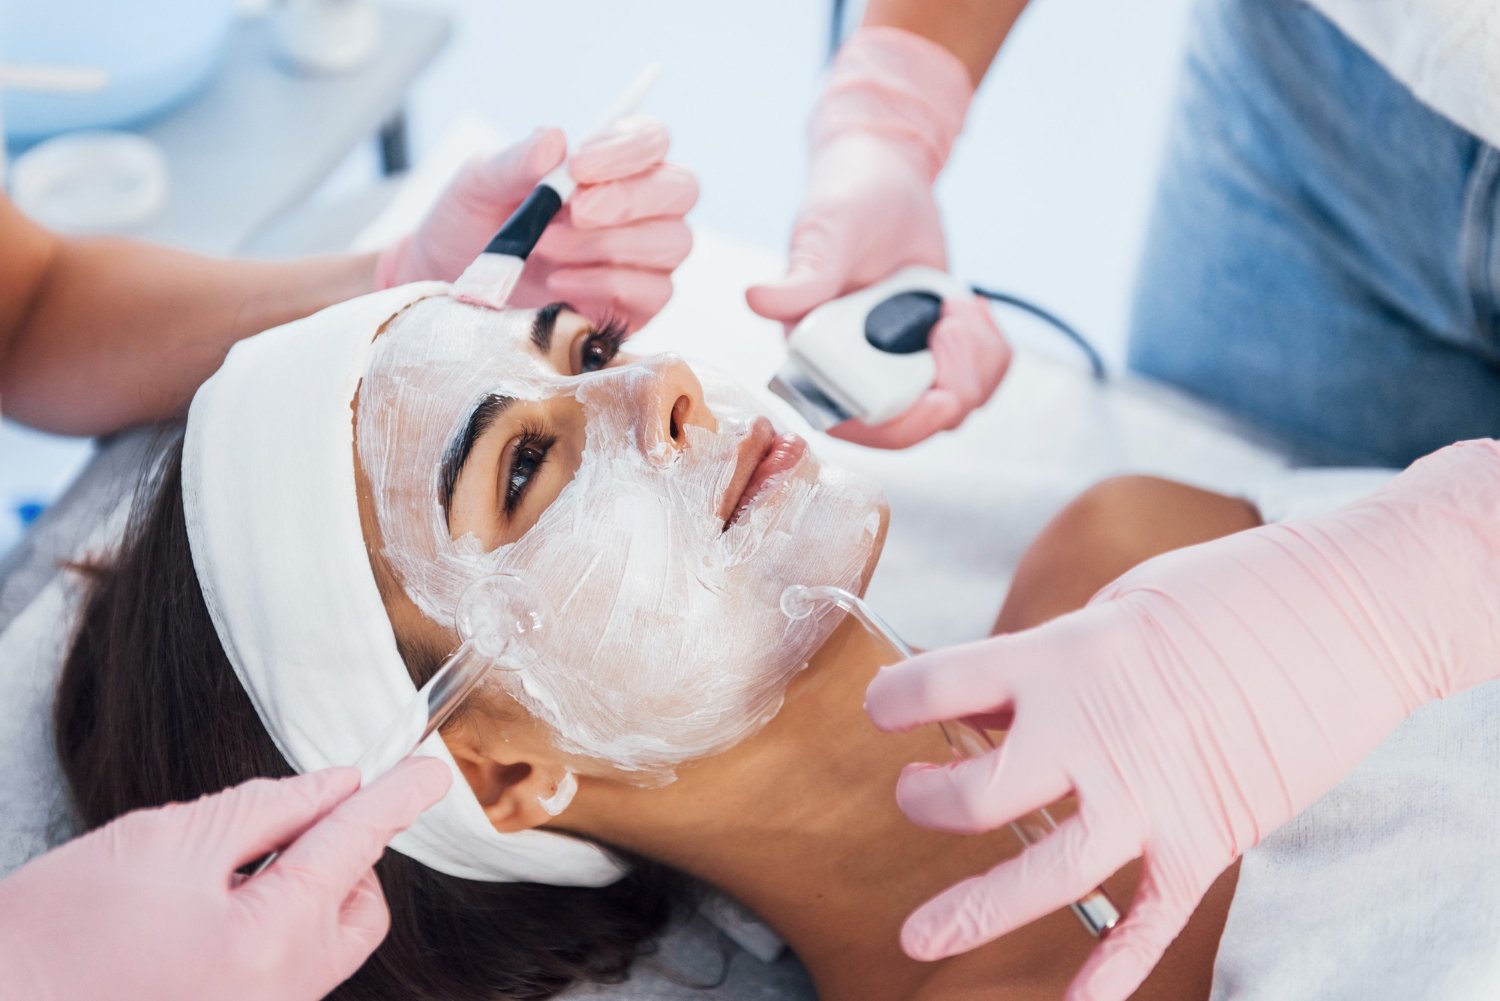 Why should you avoid at-home facial treatment?